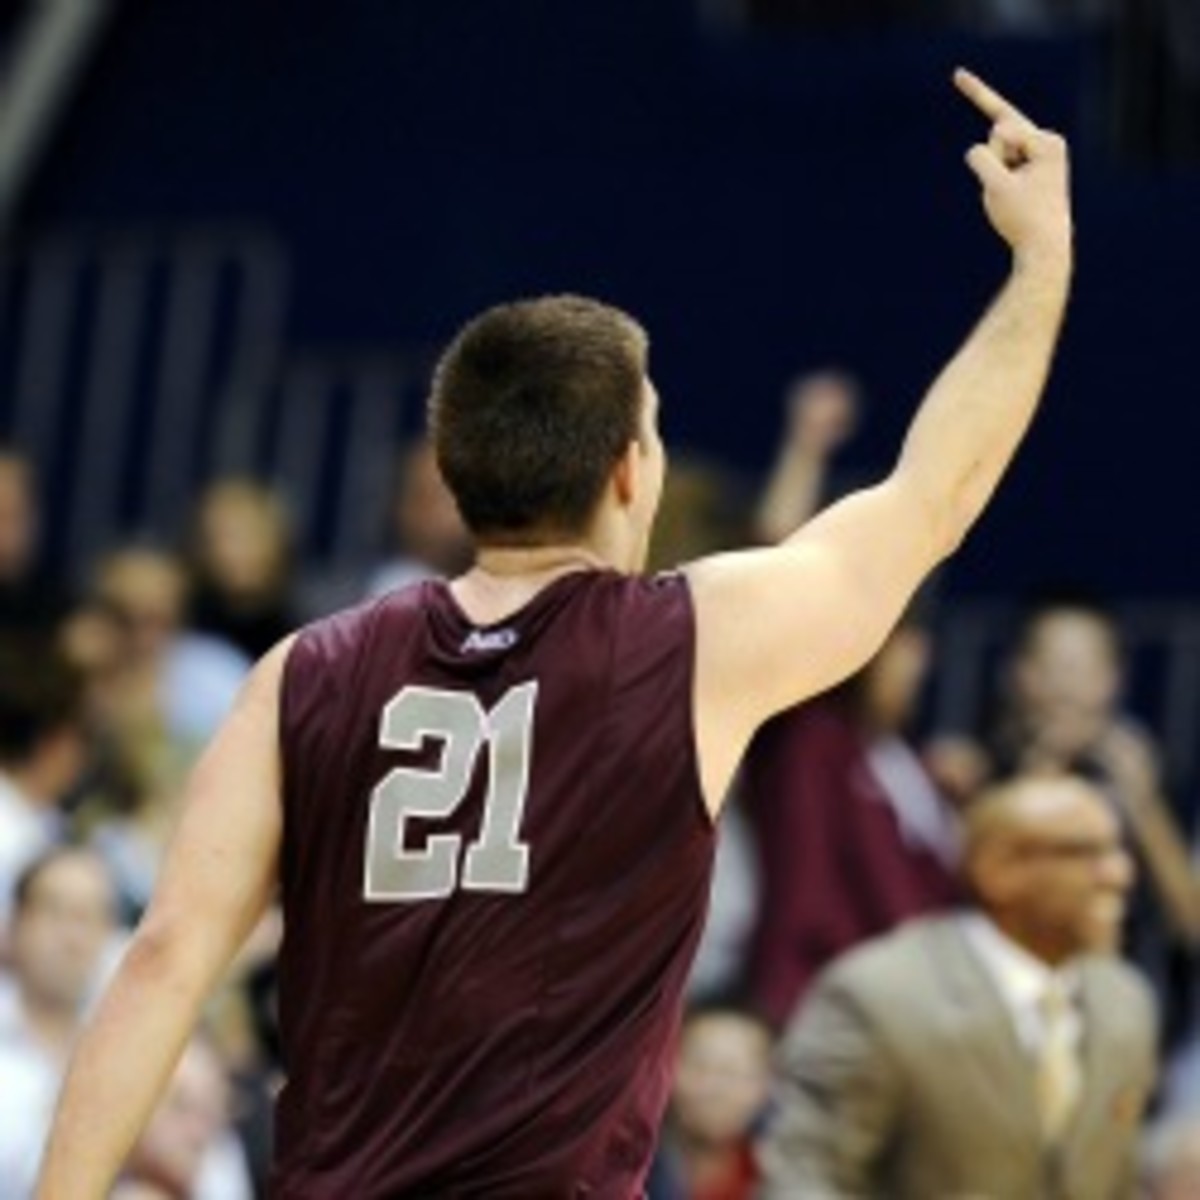 St. Joe's forward Halil Kanacevic flipped off the Villanova student section, then lost the game for his team. (Michael Perez/AP Photo)